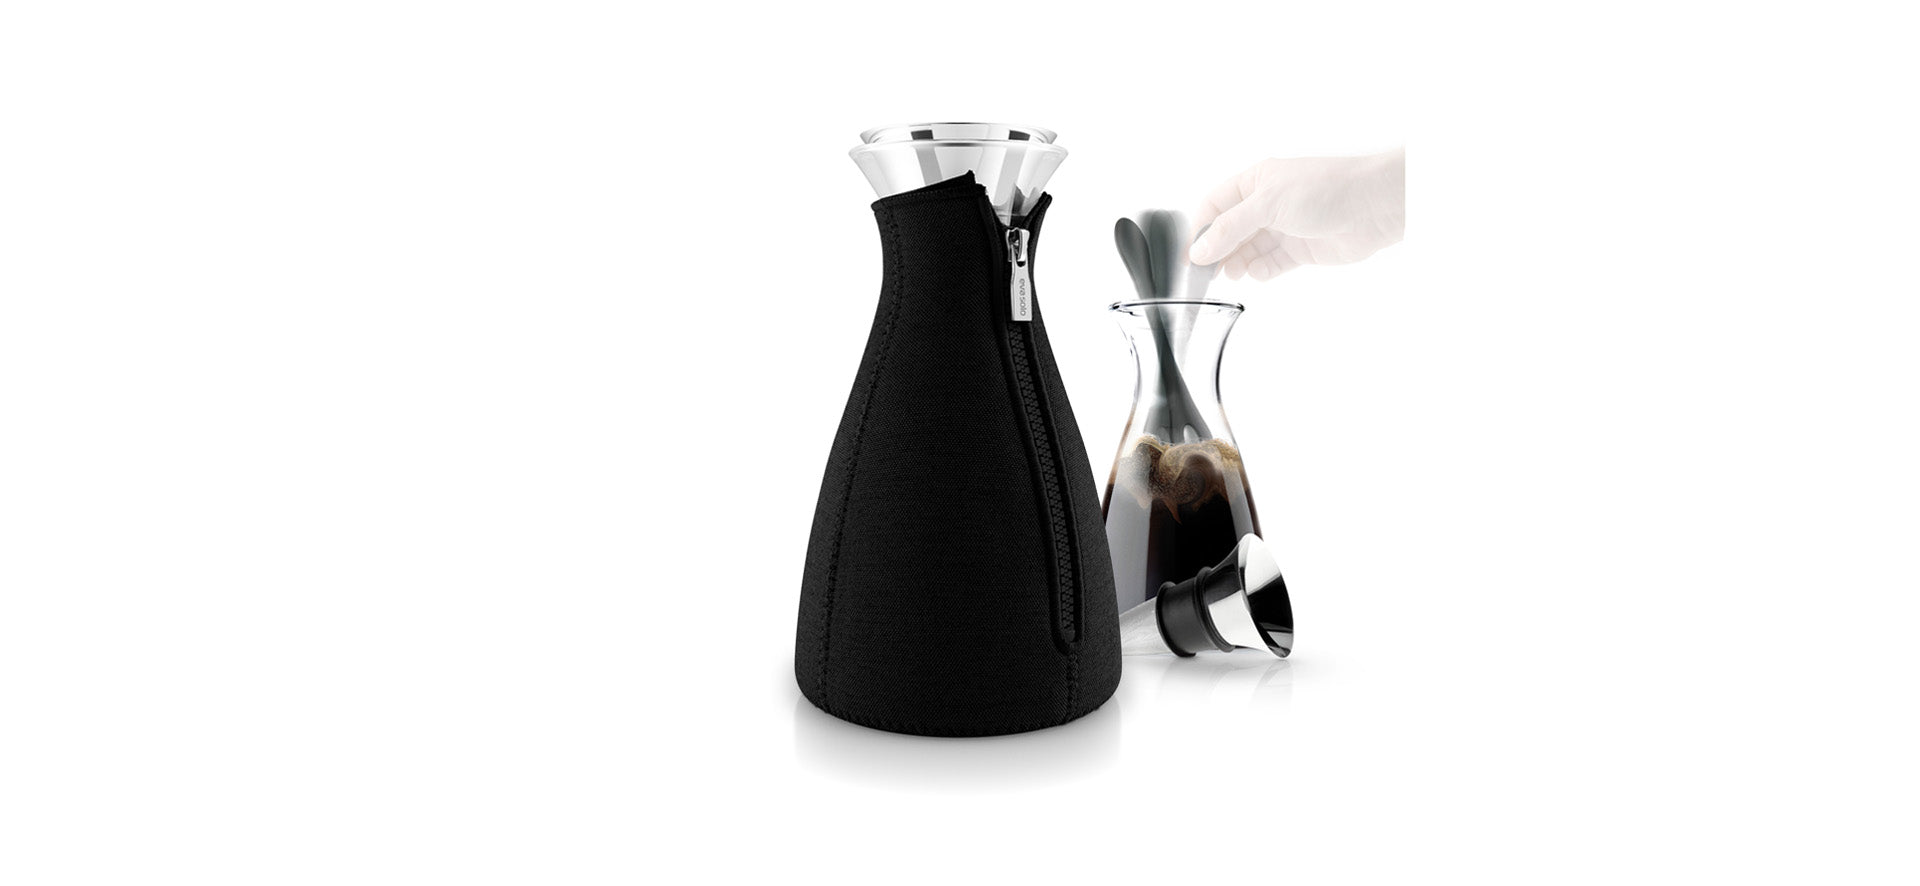 Cafe Solo Coffee Maker with Woven Cover, 1.0L